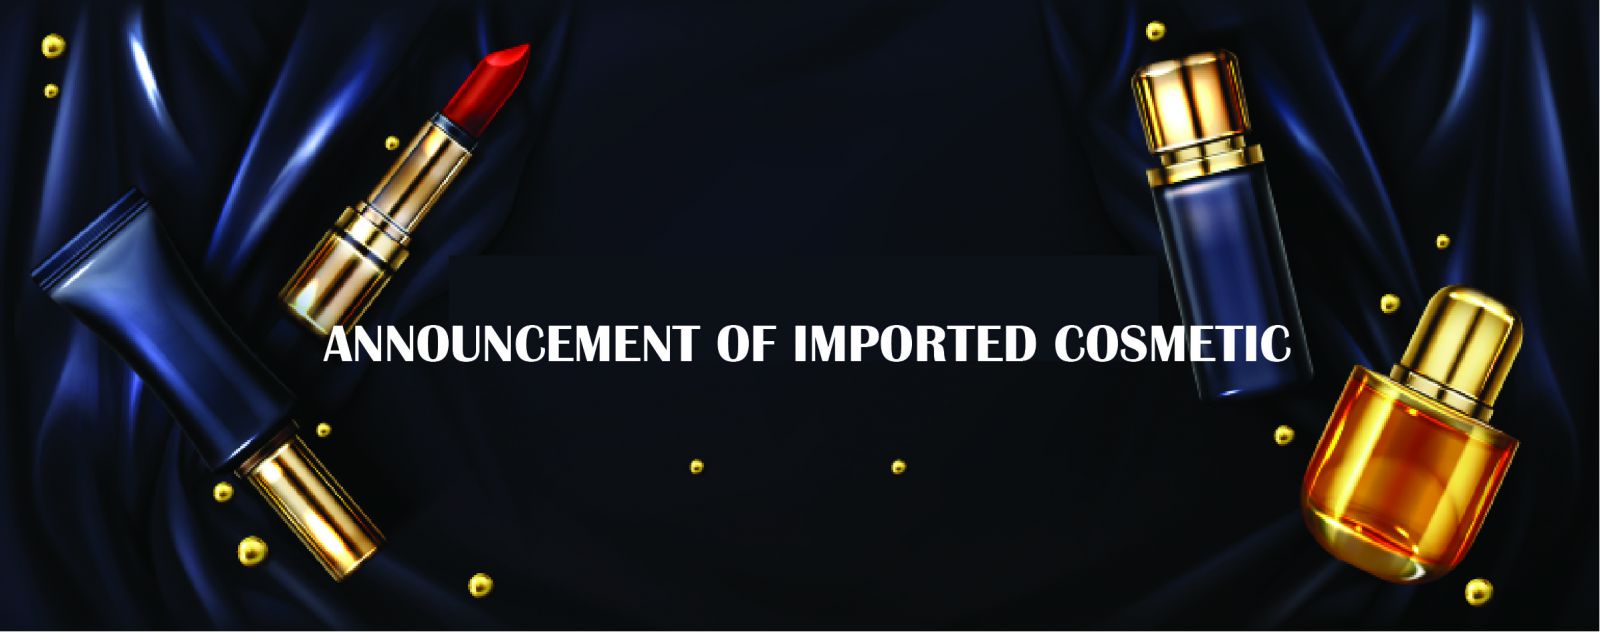 ANNOUNCEMENT OF IMPORTED COSMETIC